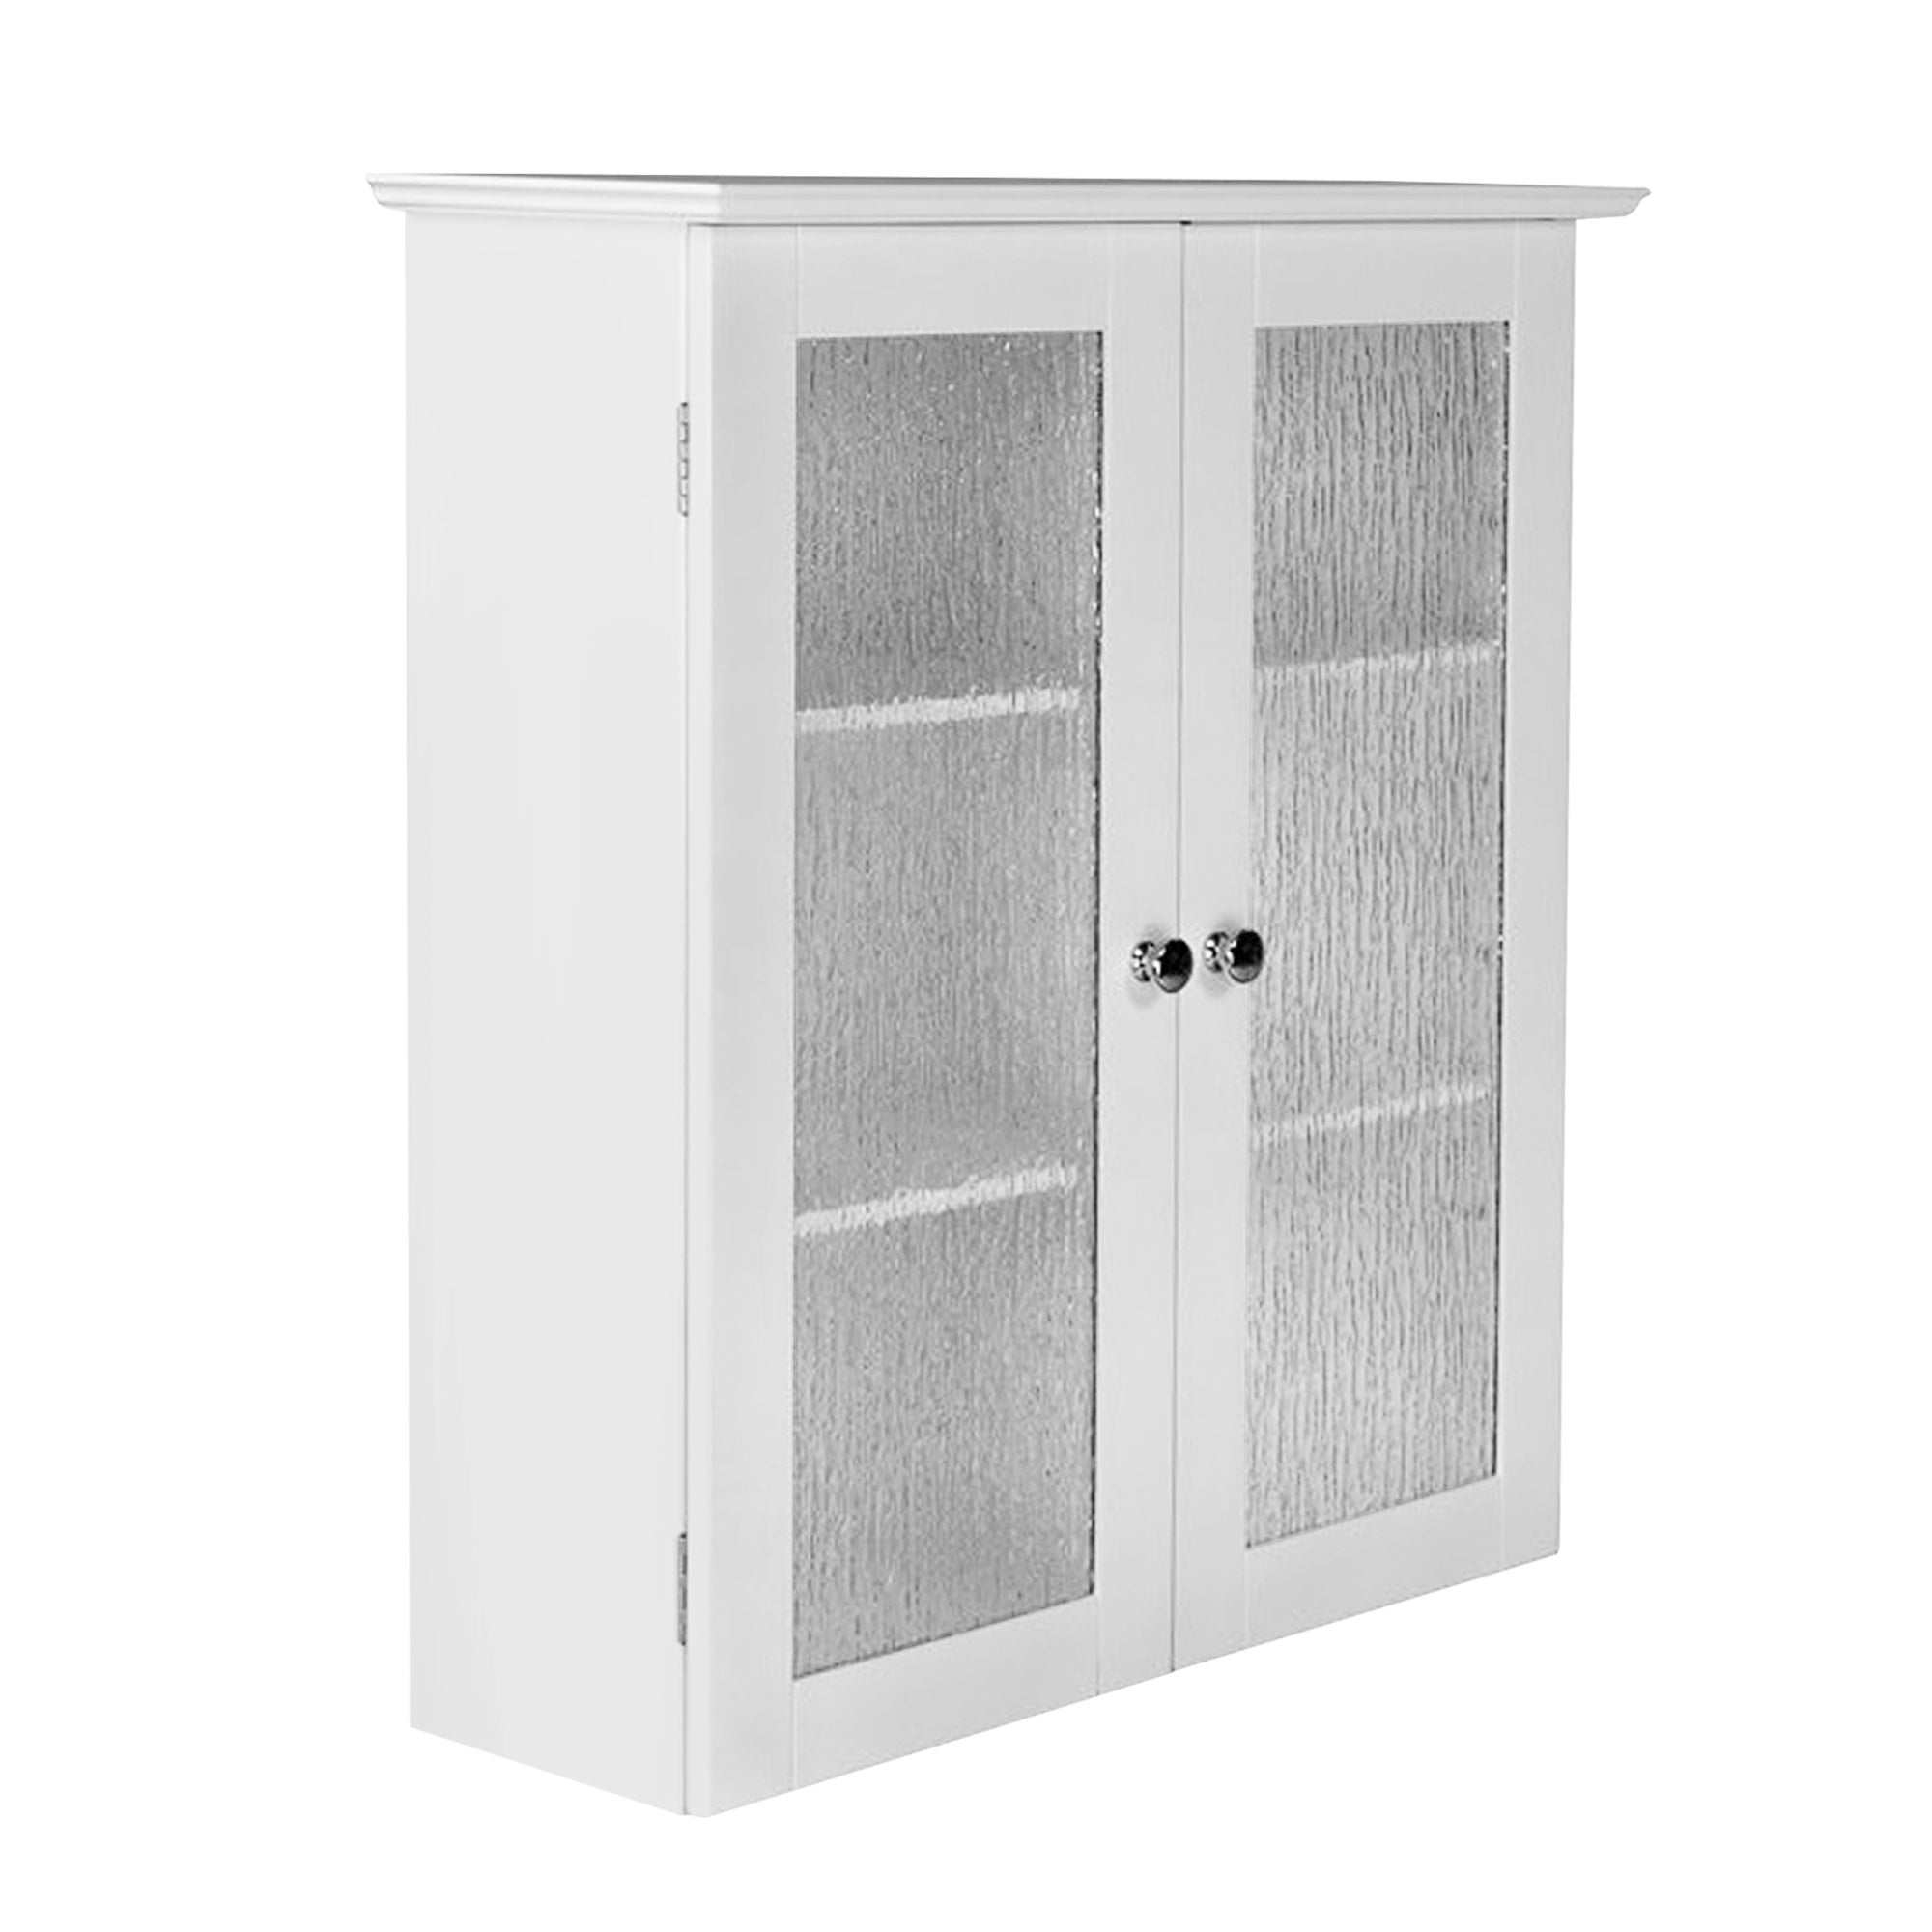 Elegant Home Fashions Connor Removable Wall Cabinet with 2 Glass Doors